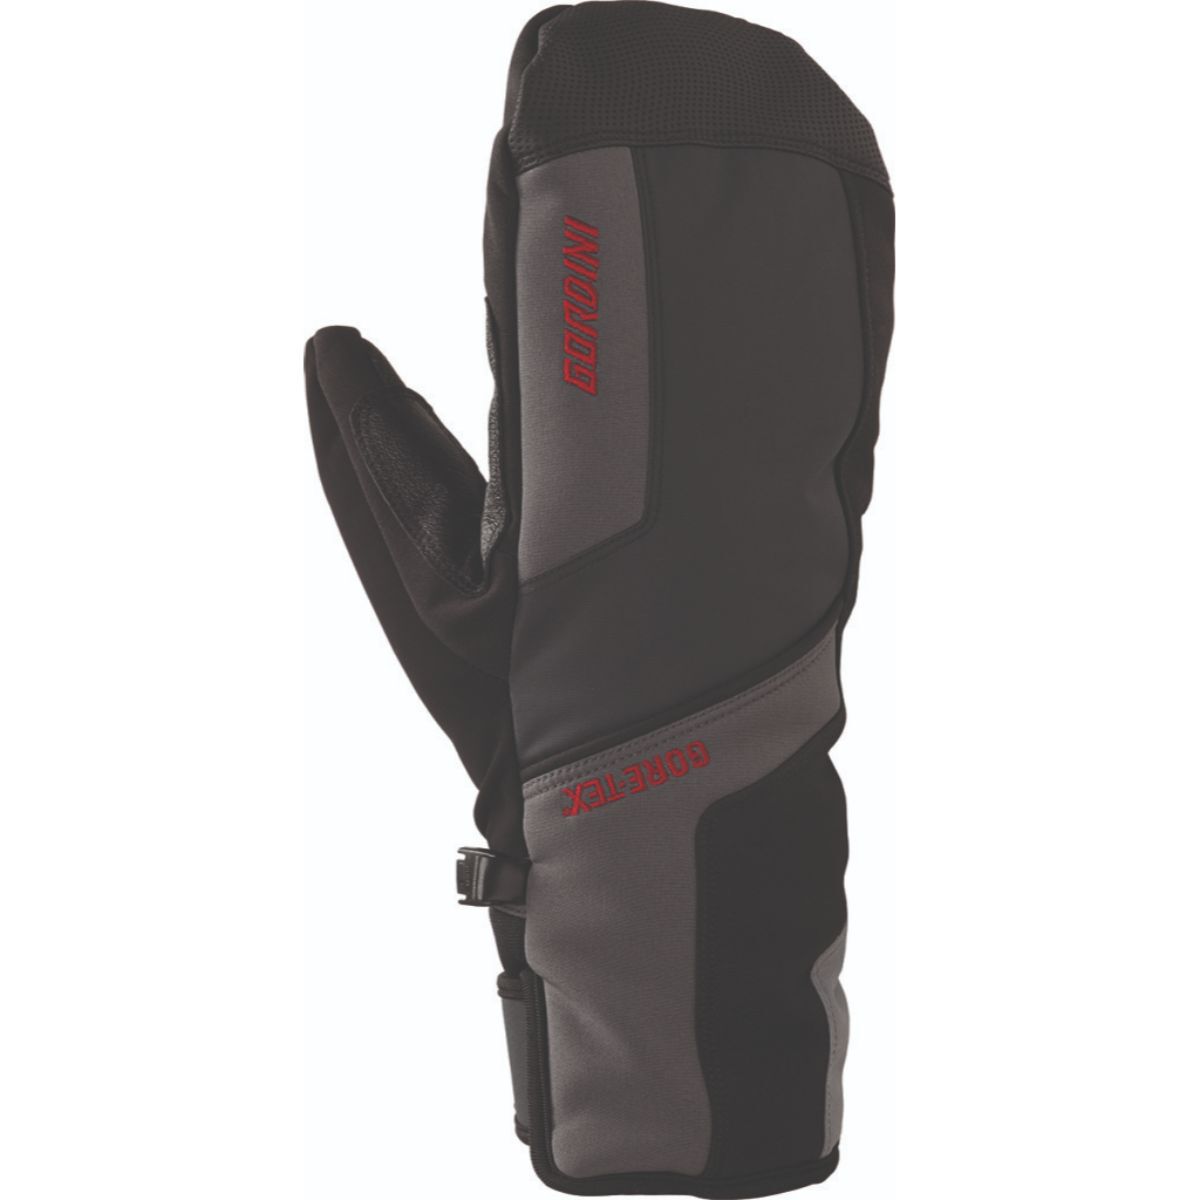 Mens' Gloves & Mittens | Free Shipping Over $50 | Christy Sports